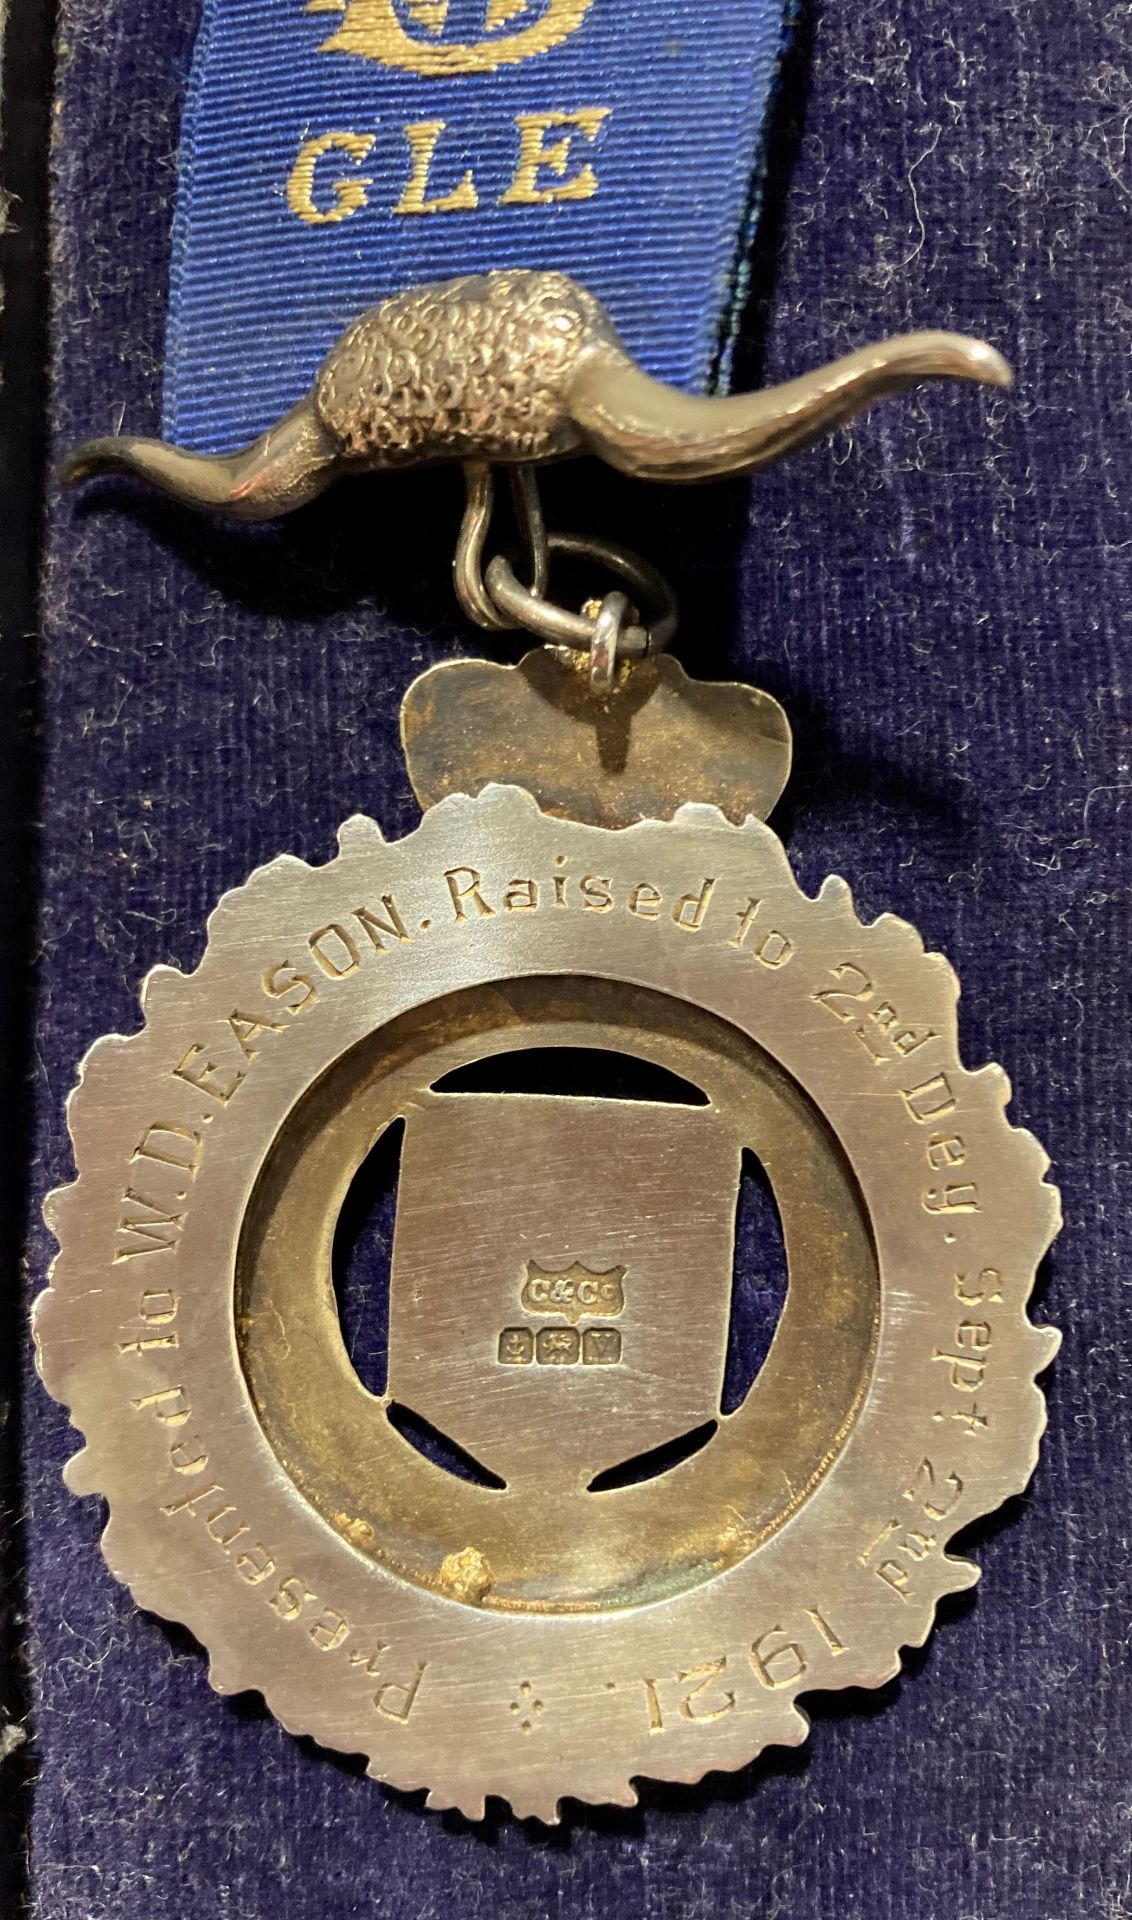 Four assorted RAOB solid silver and enamel medals Carlisle LGE 2264 GLE medal presented to W. - Image 3 of 7